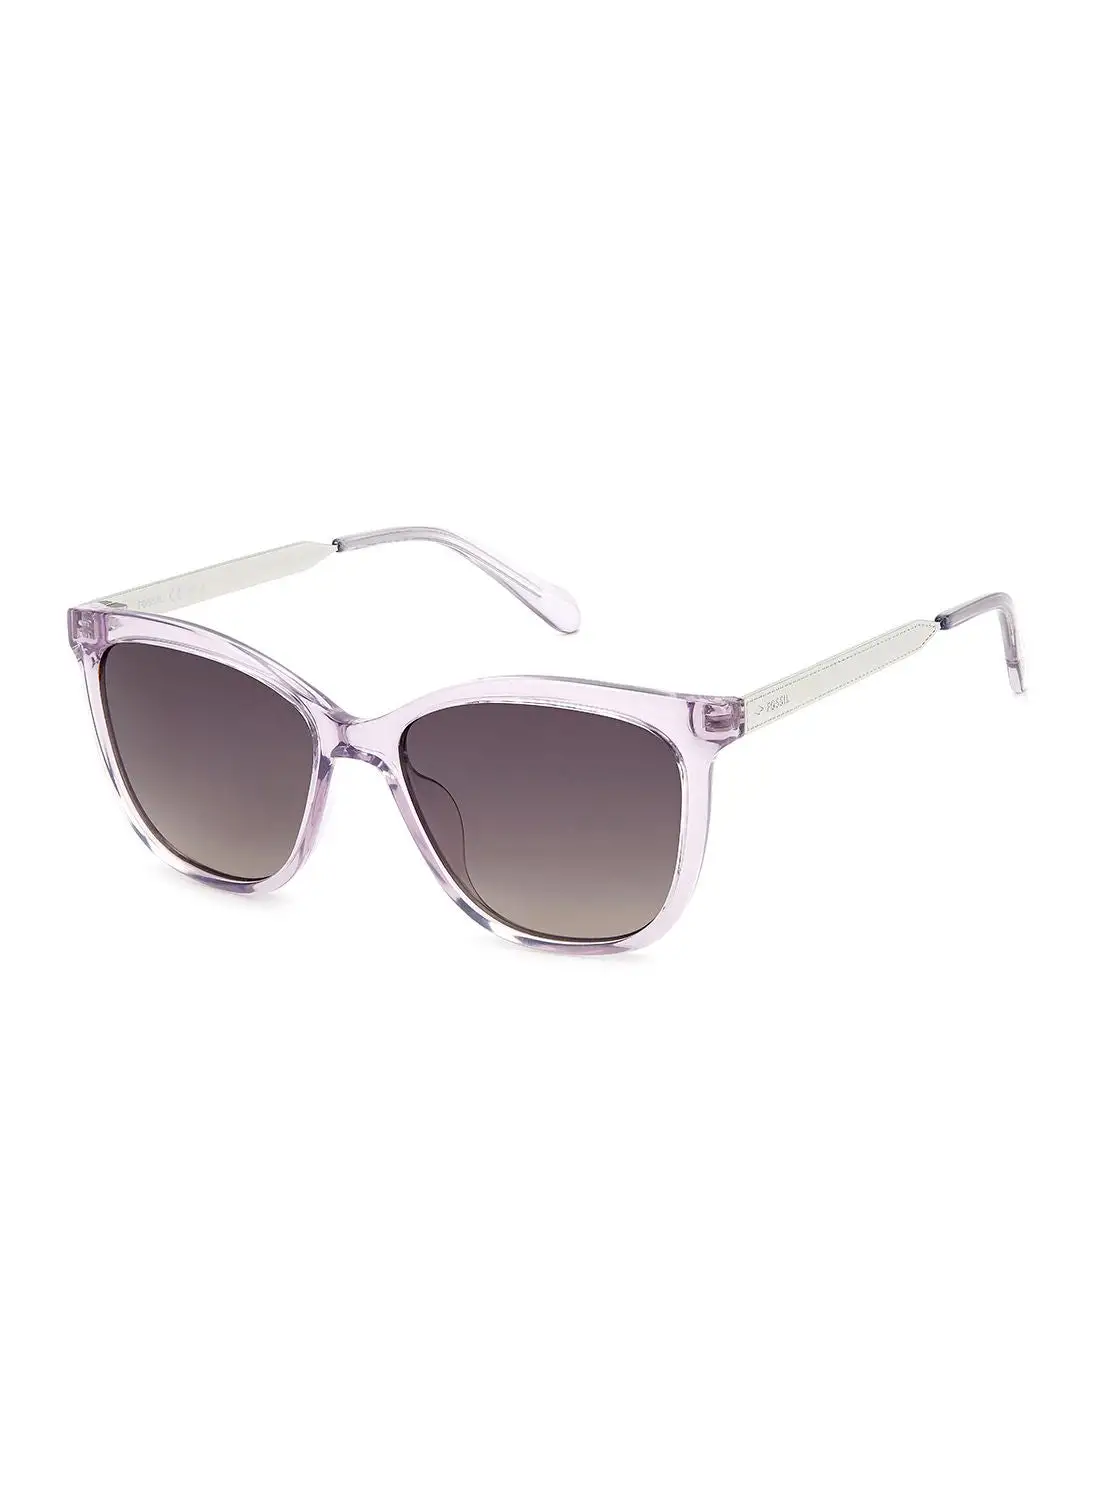 FOSSIL Women's UV Protection Cat Eye Sunglasses - Fos 3142/S Lilac 54 - Lens Size: 54 Mm